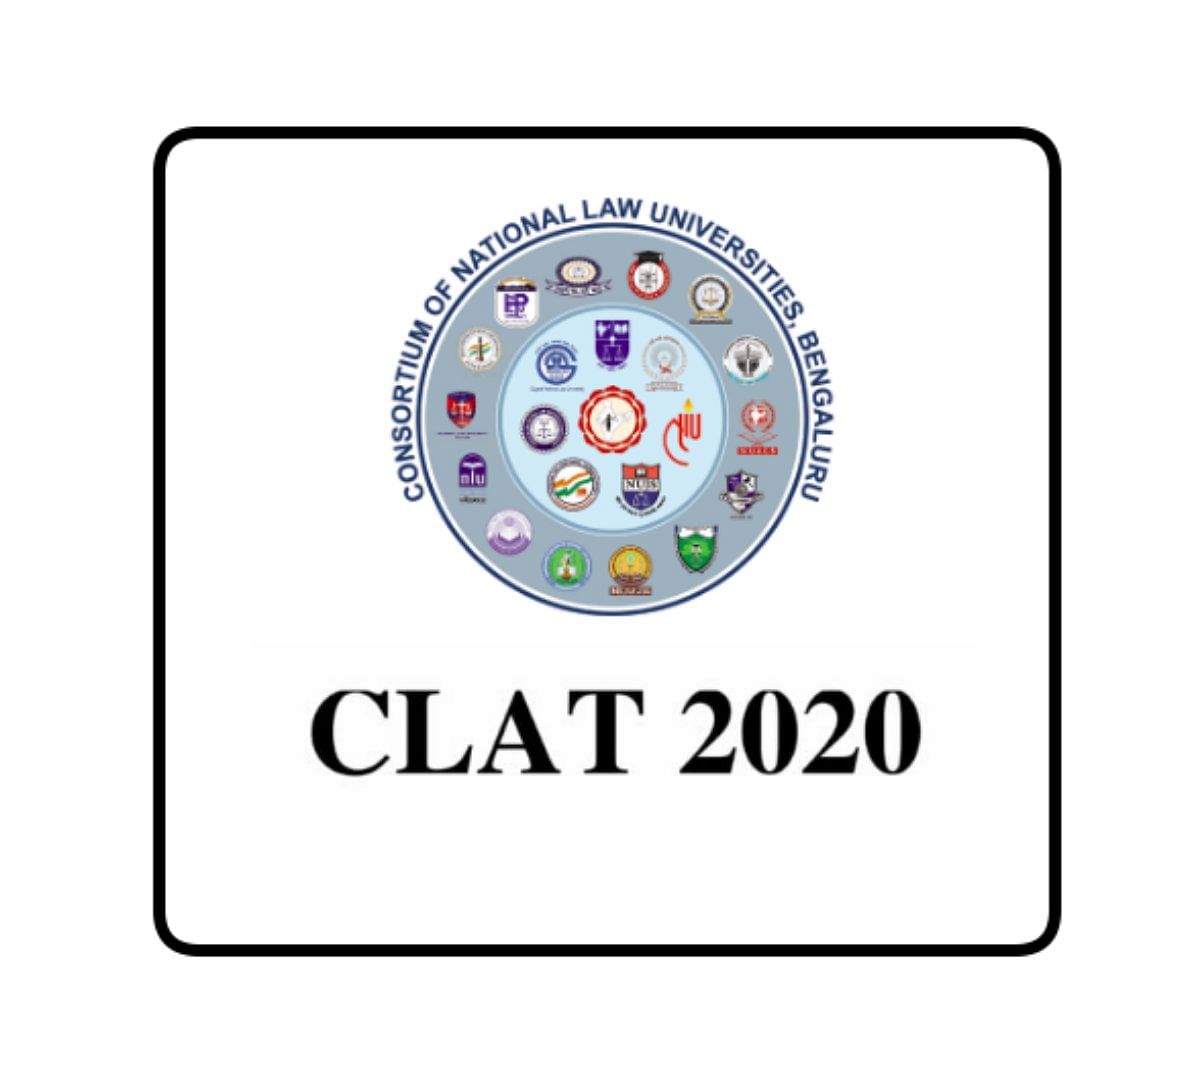 Two days left to Apply Online for CLAT 2020, Candidates can Enroll in These Courses